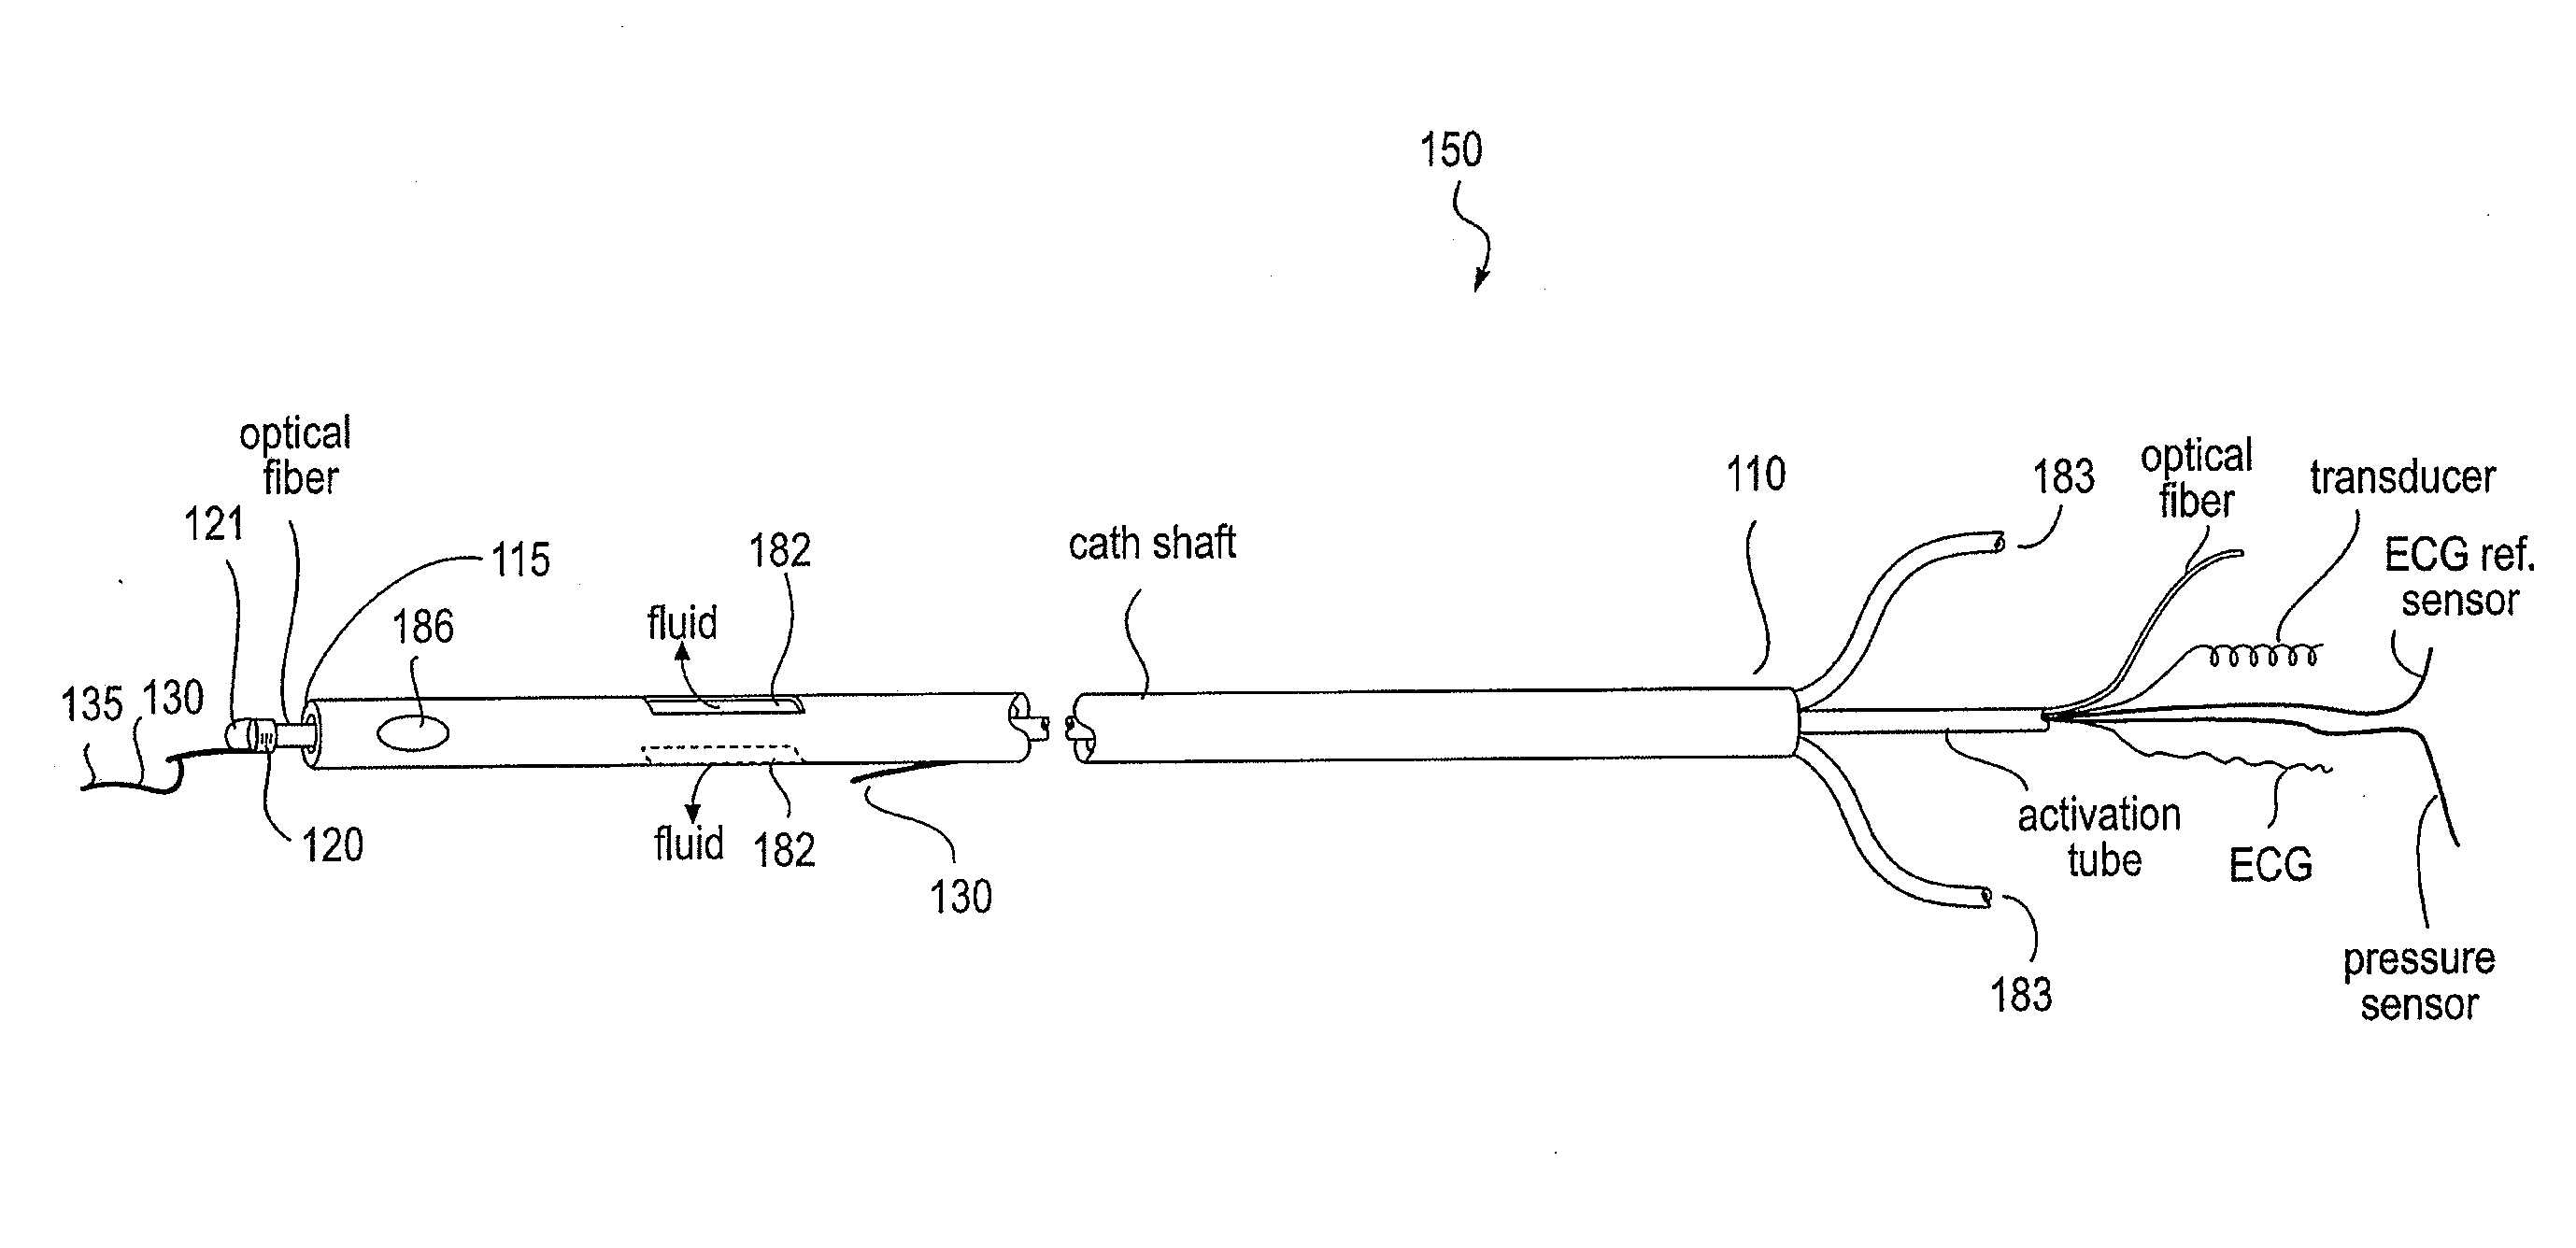 Endovascular devices and methods of use